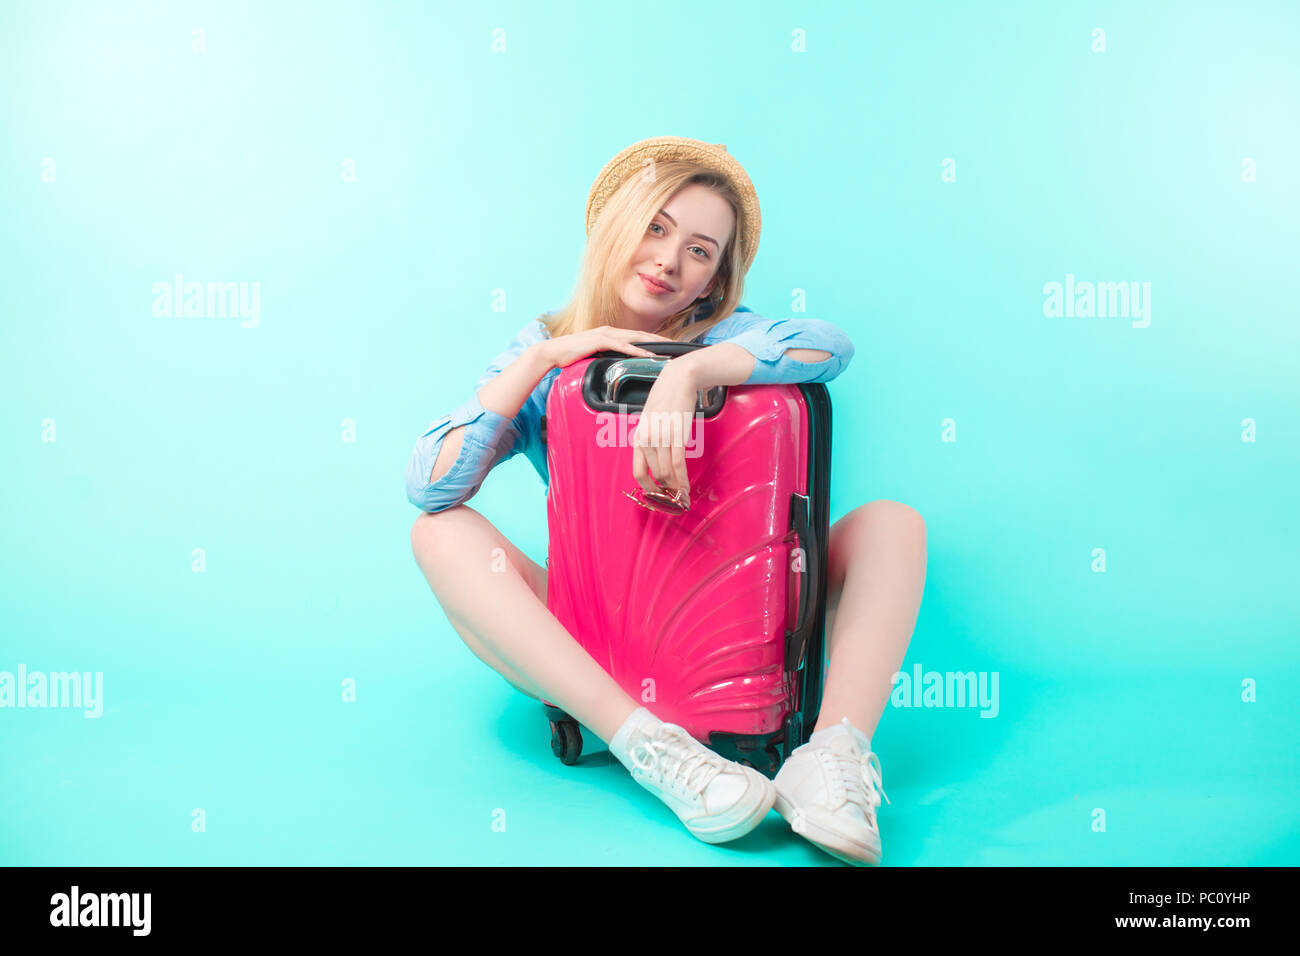 woman sitting behind the suit case. full length portrait.copy space. happy travelling.itchy feet Stock Photo